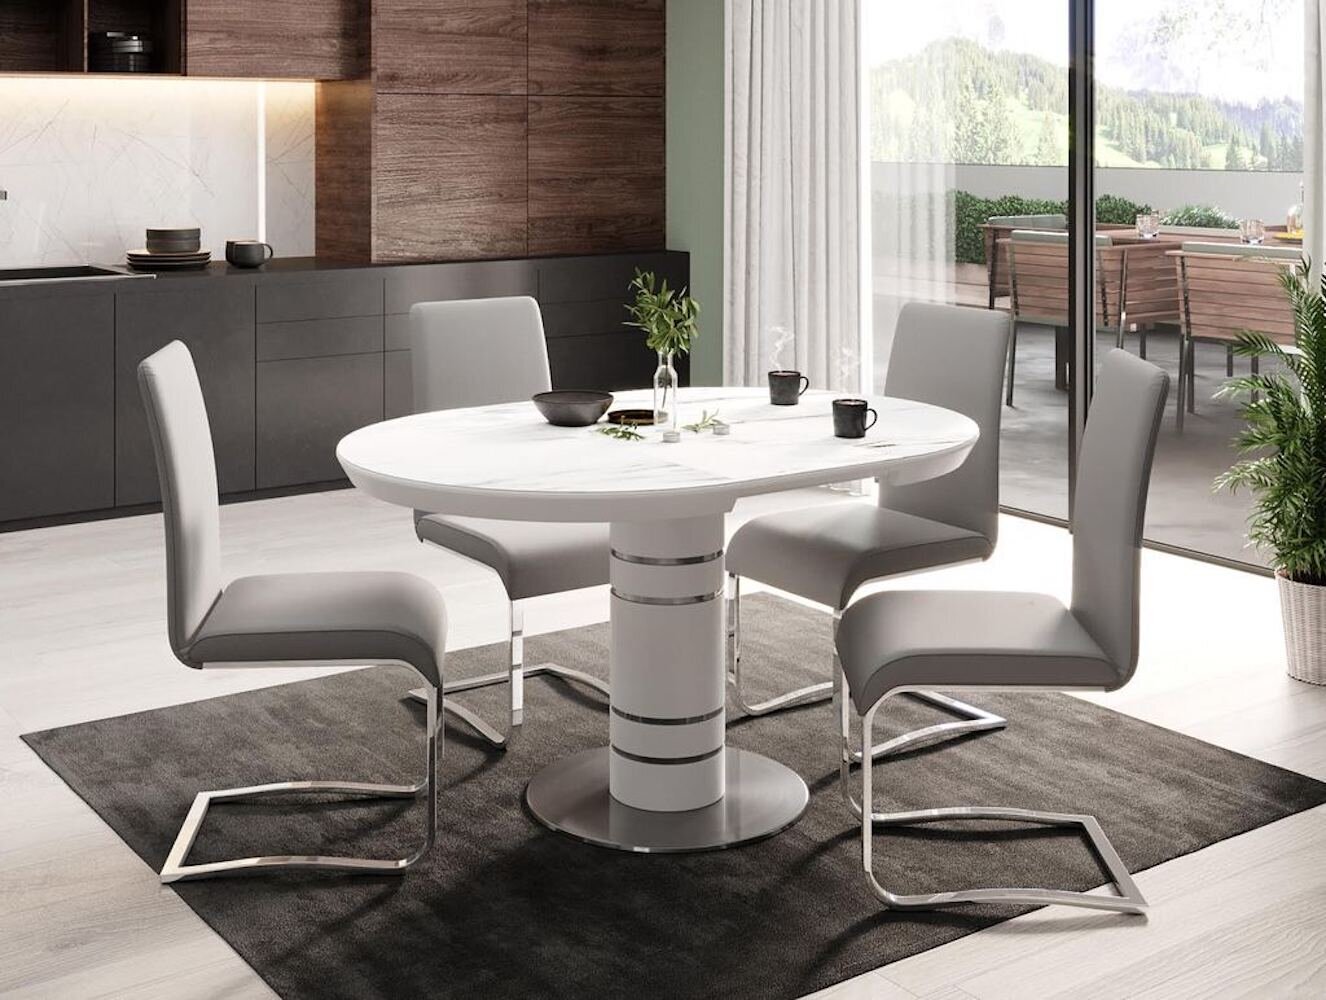 Modern, minimal round dining table set for 8